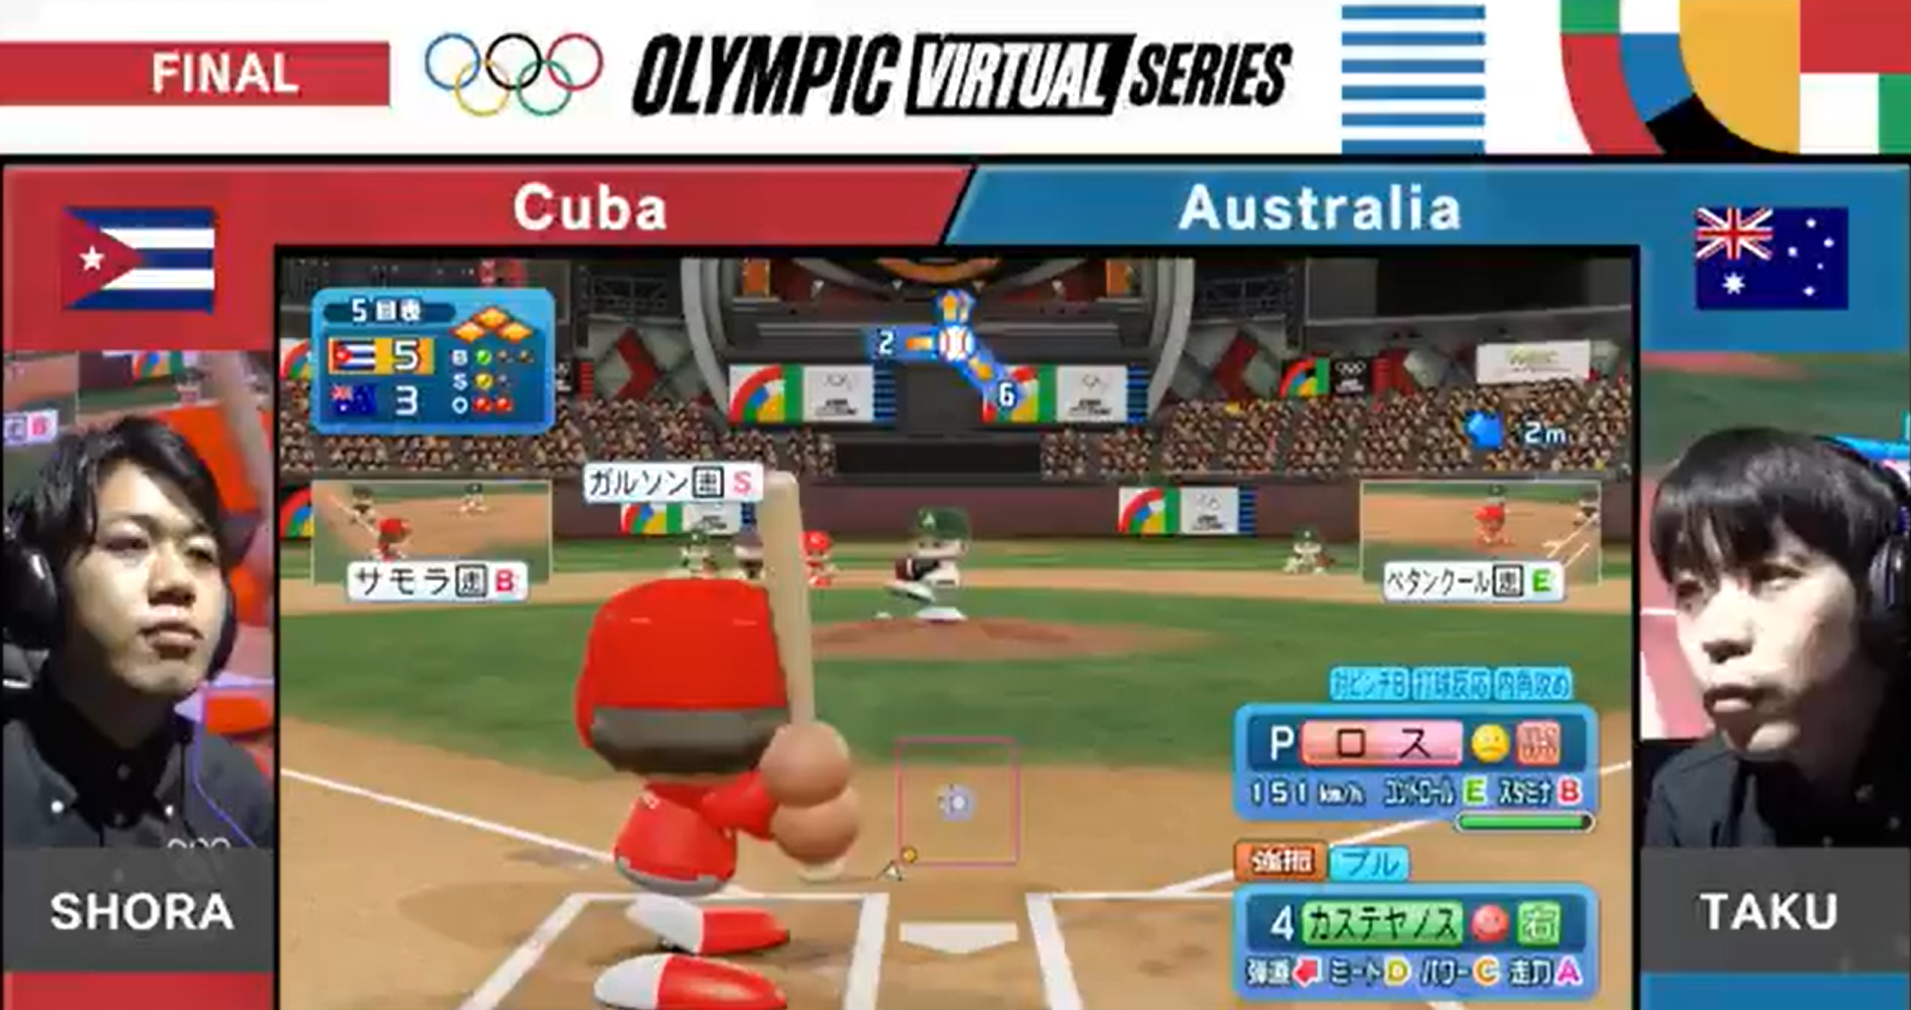 Baseball featured in the inaugural Olympic Virtual Series last year ©Twitter/WBSC